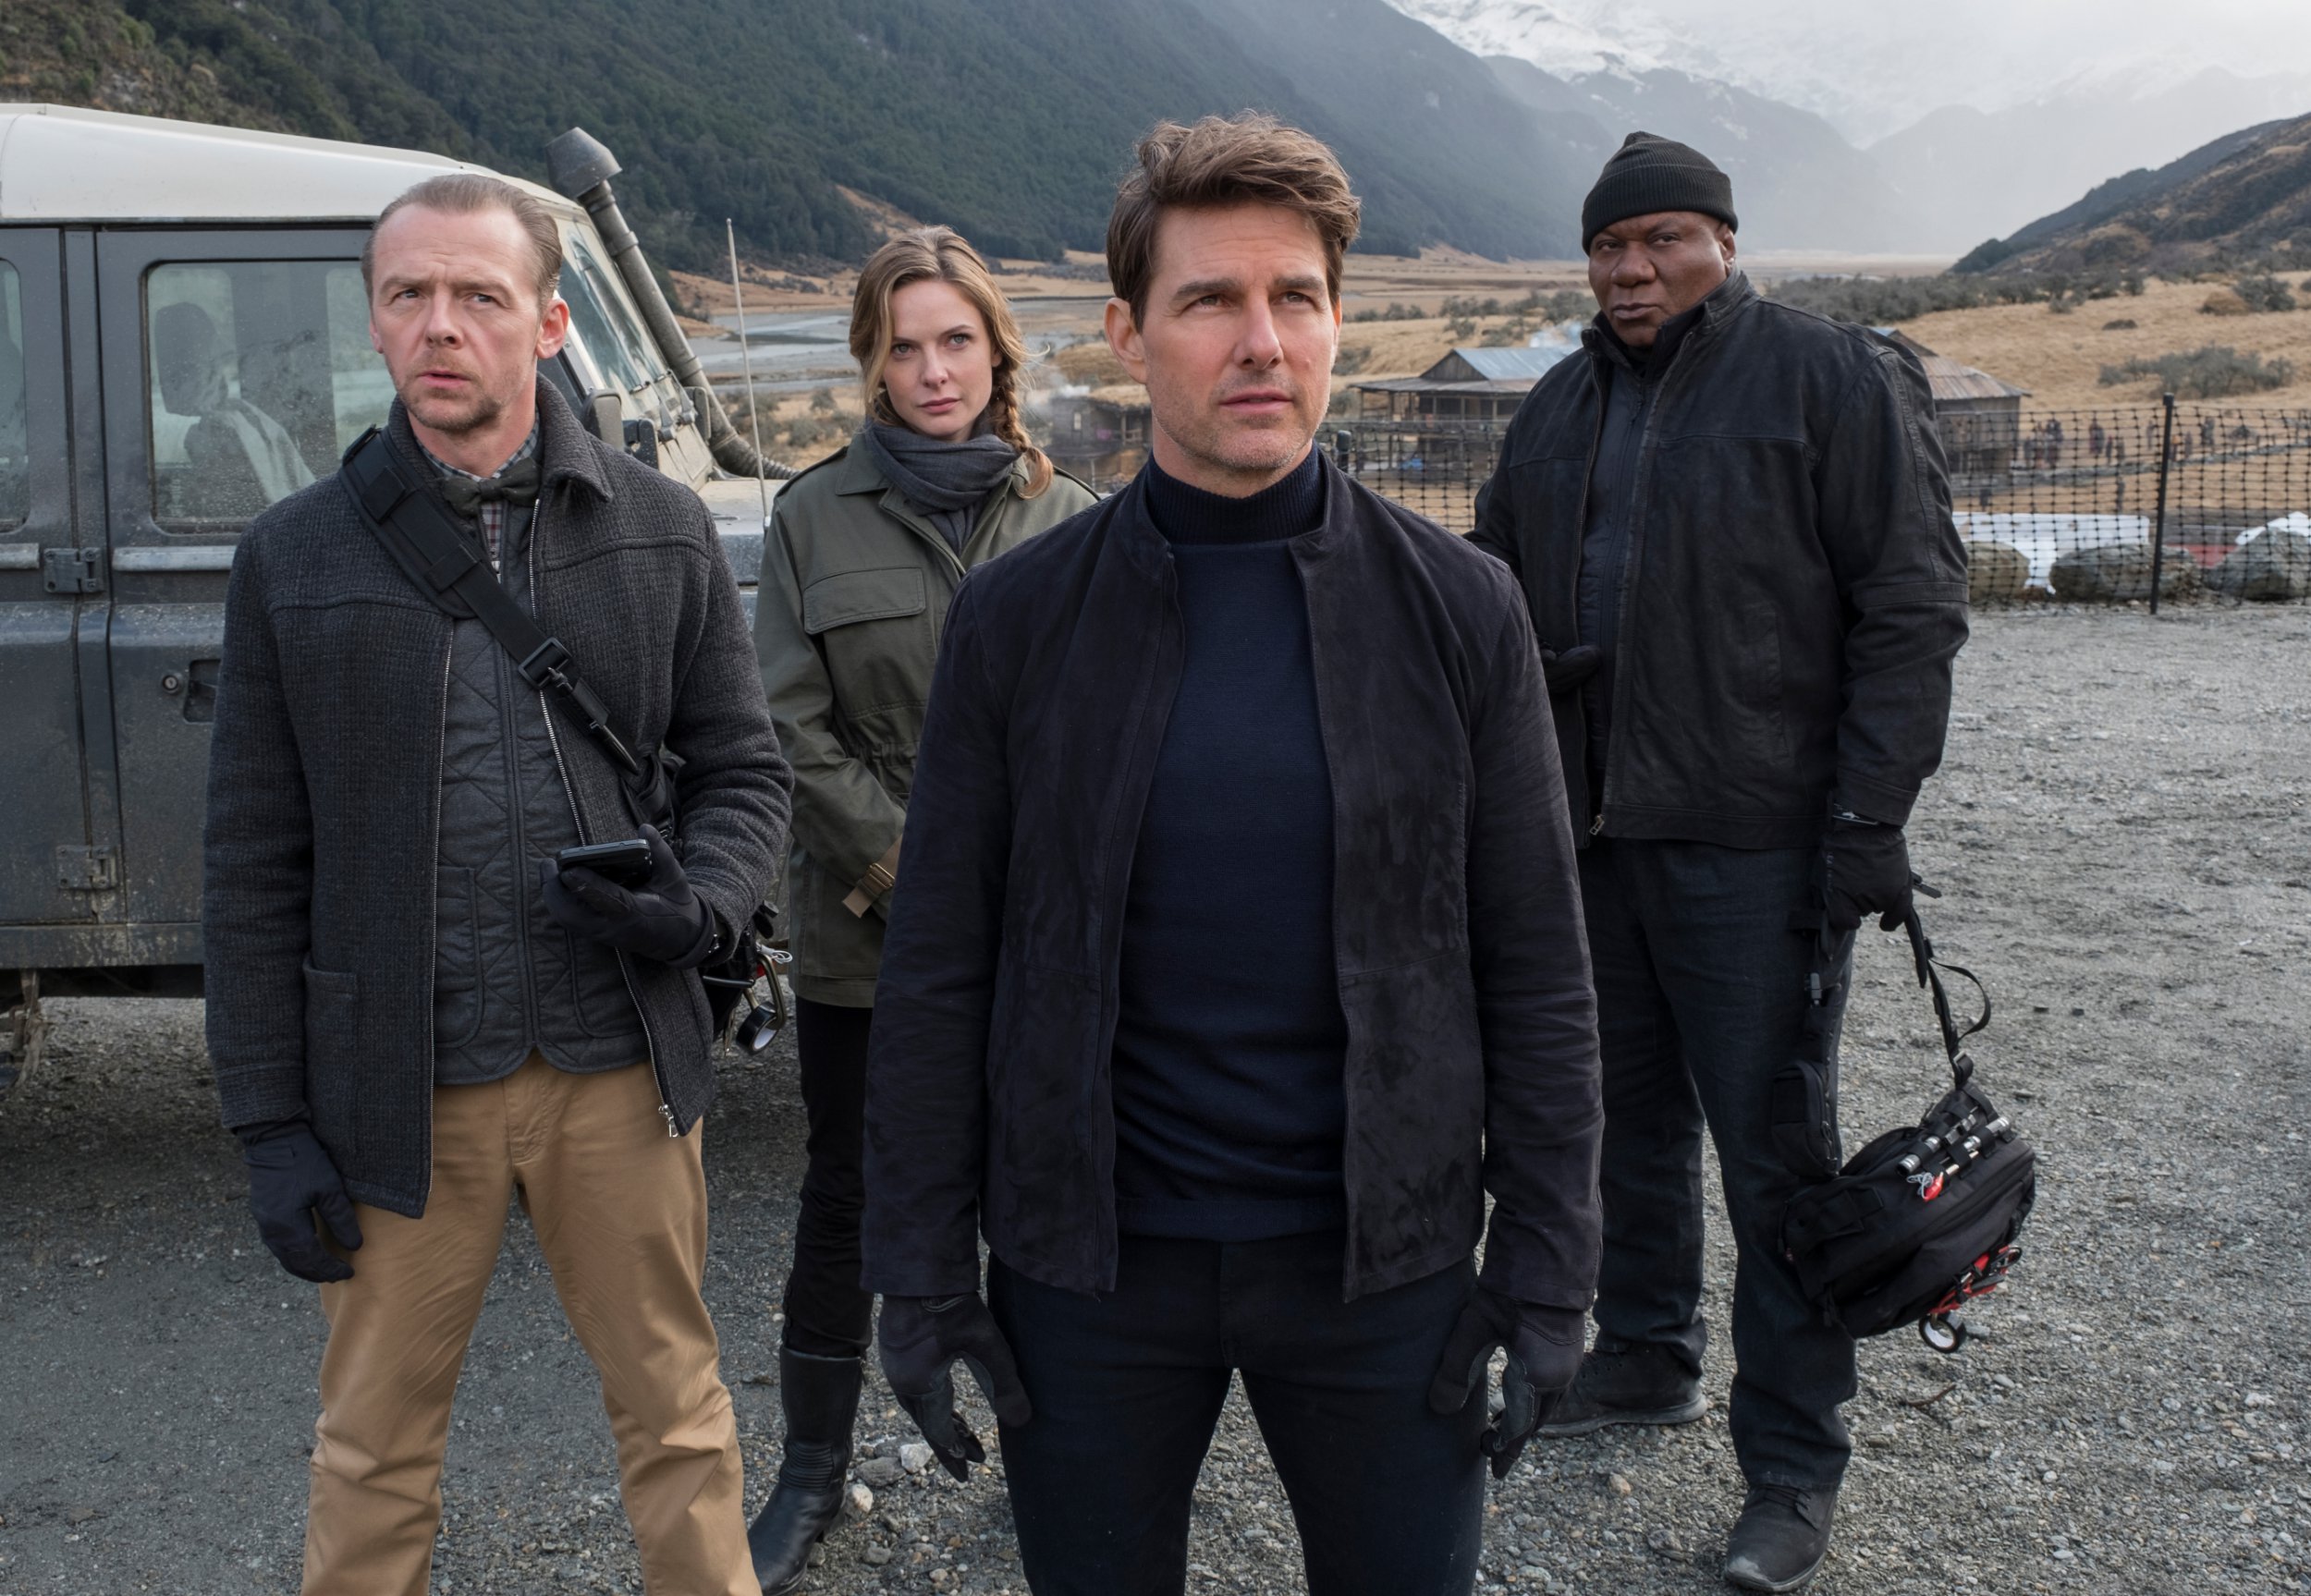 Benji Dunn (Simon Pegg), Ilsa Faust (Rebecca Ferguson), Ethan Hunt (Tom Cruise), and Luther Stickell (Ving Rhames) are the IMF team in Mission: Impossible - Fallout